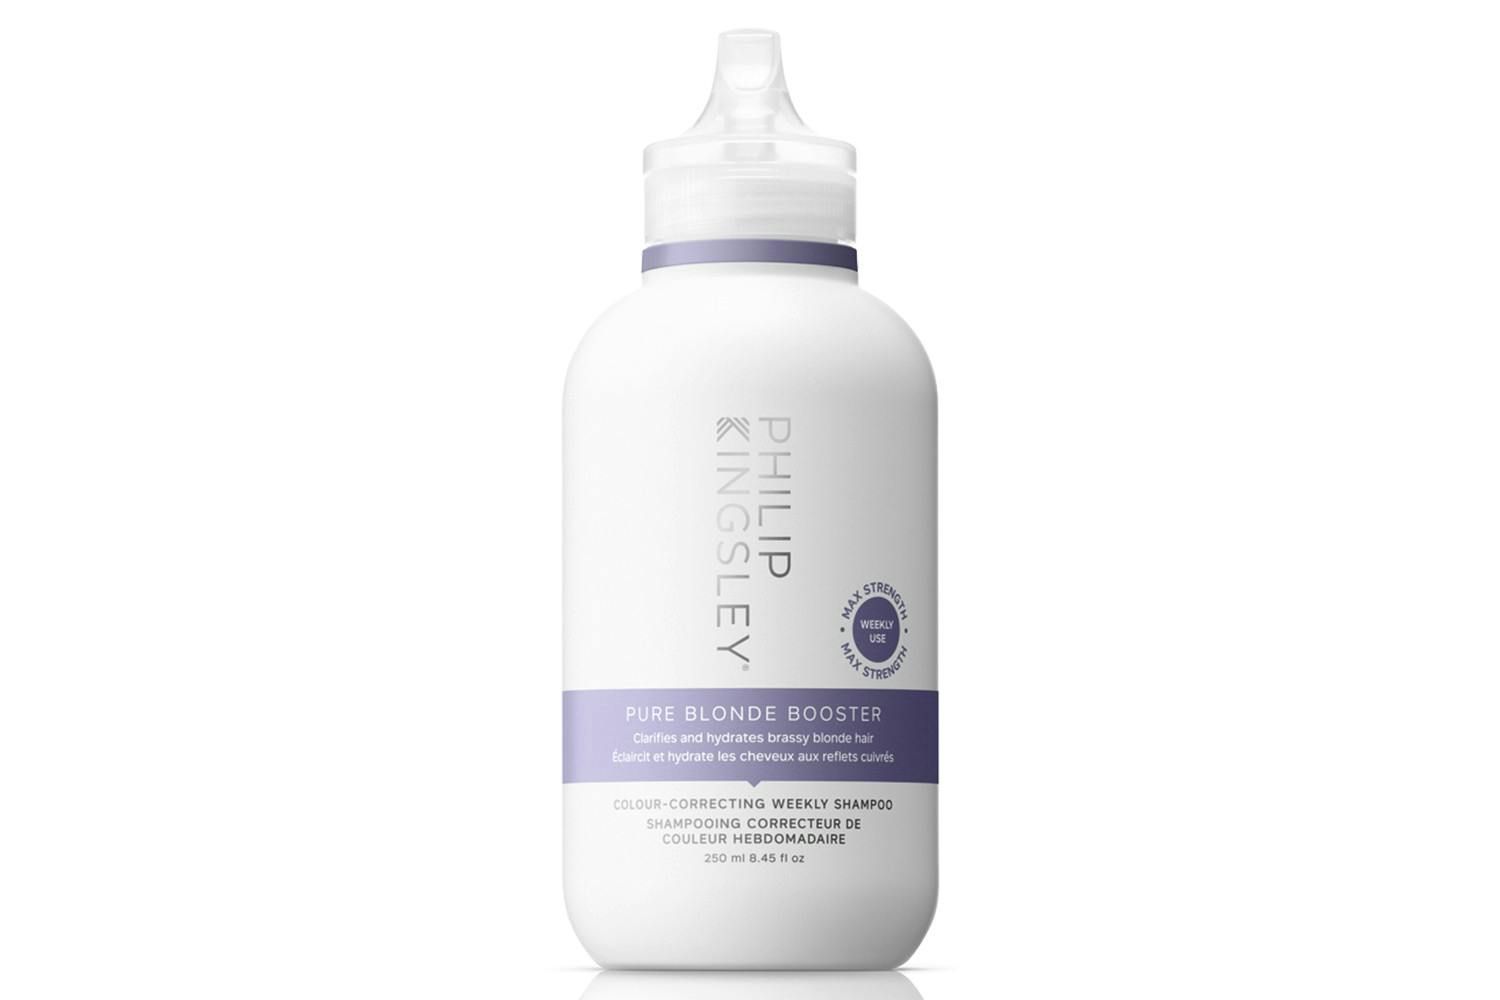 Philip Kingsley 263073 Pure Blonde Booster Colour - Correcting Weekly Shampoo | 250 ml